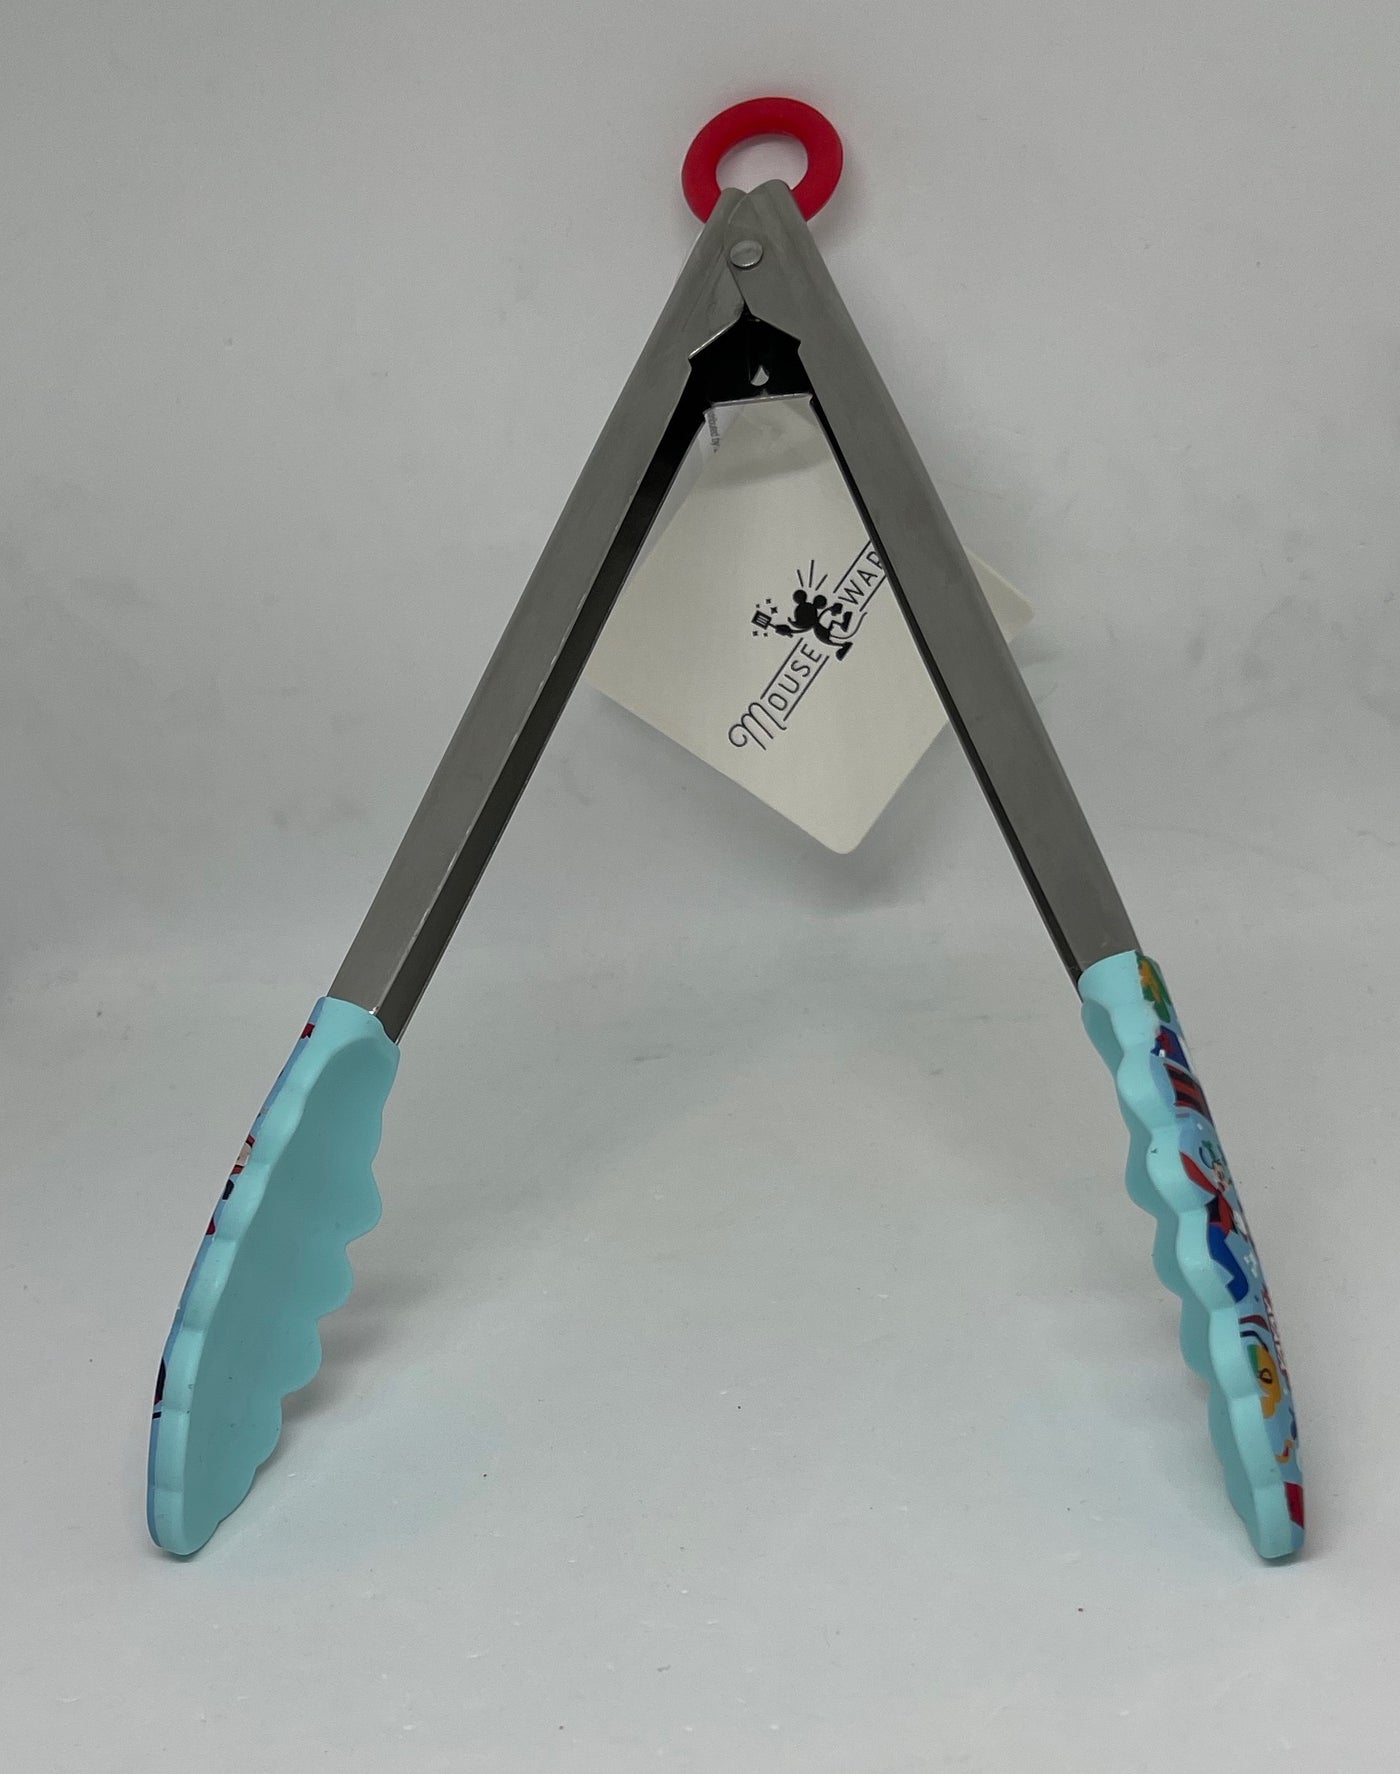 Disney Parks Mickey Mouse Wares Kitchen Tongs New with Tag